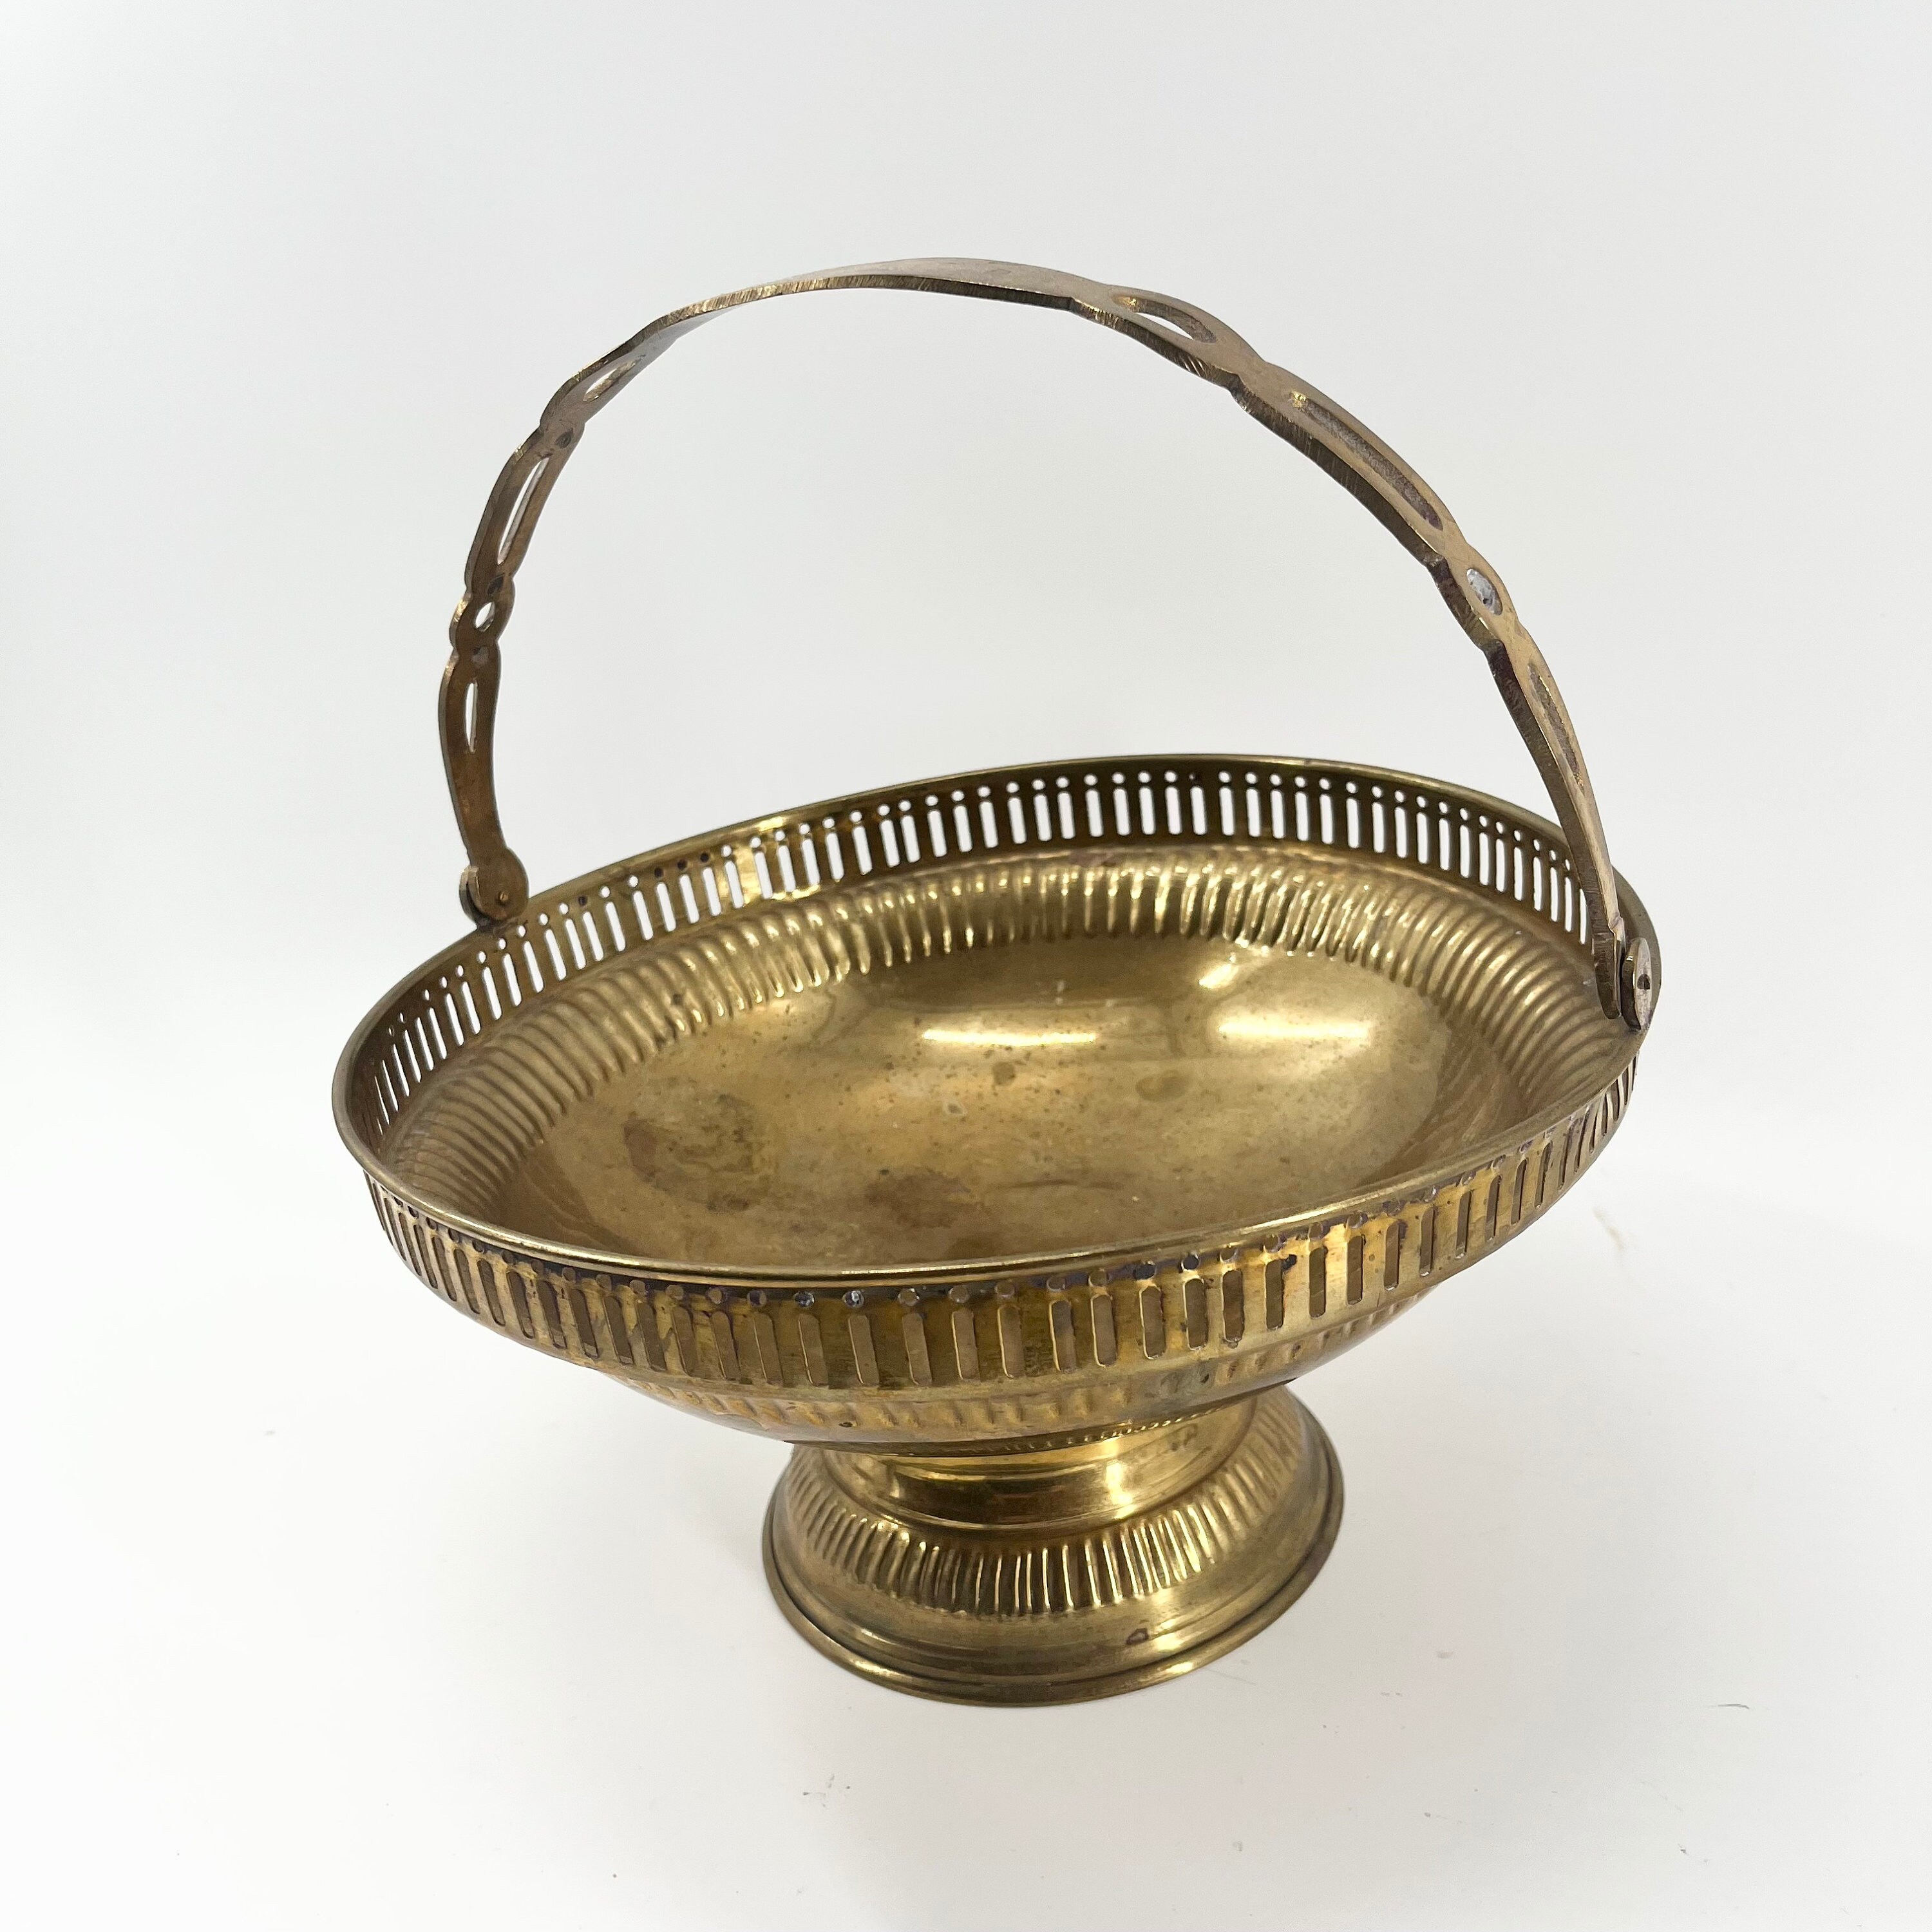 Indian Brass Bowl, Vintage Brass Bowl India, Etched Brass Bowl, World Gift  ZY India 